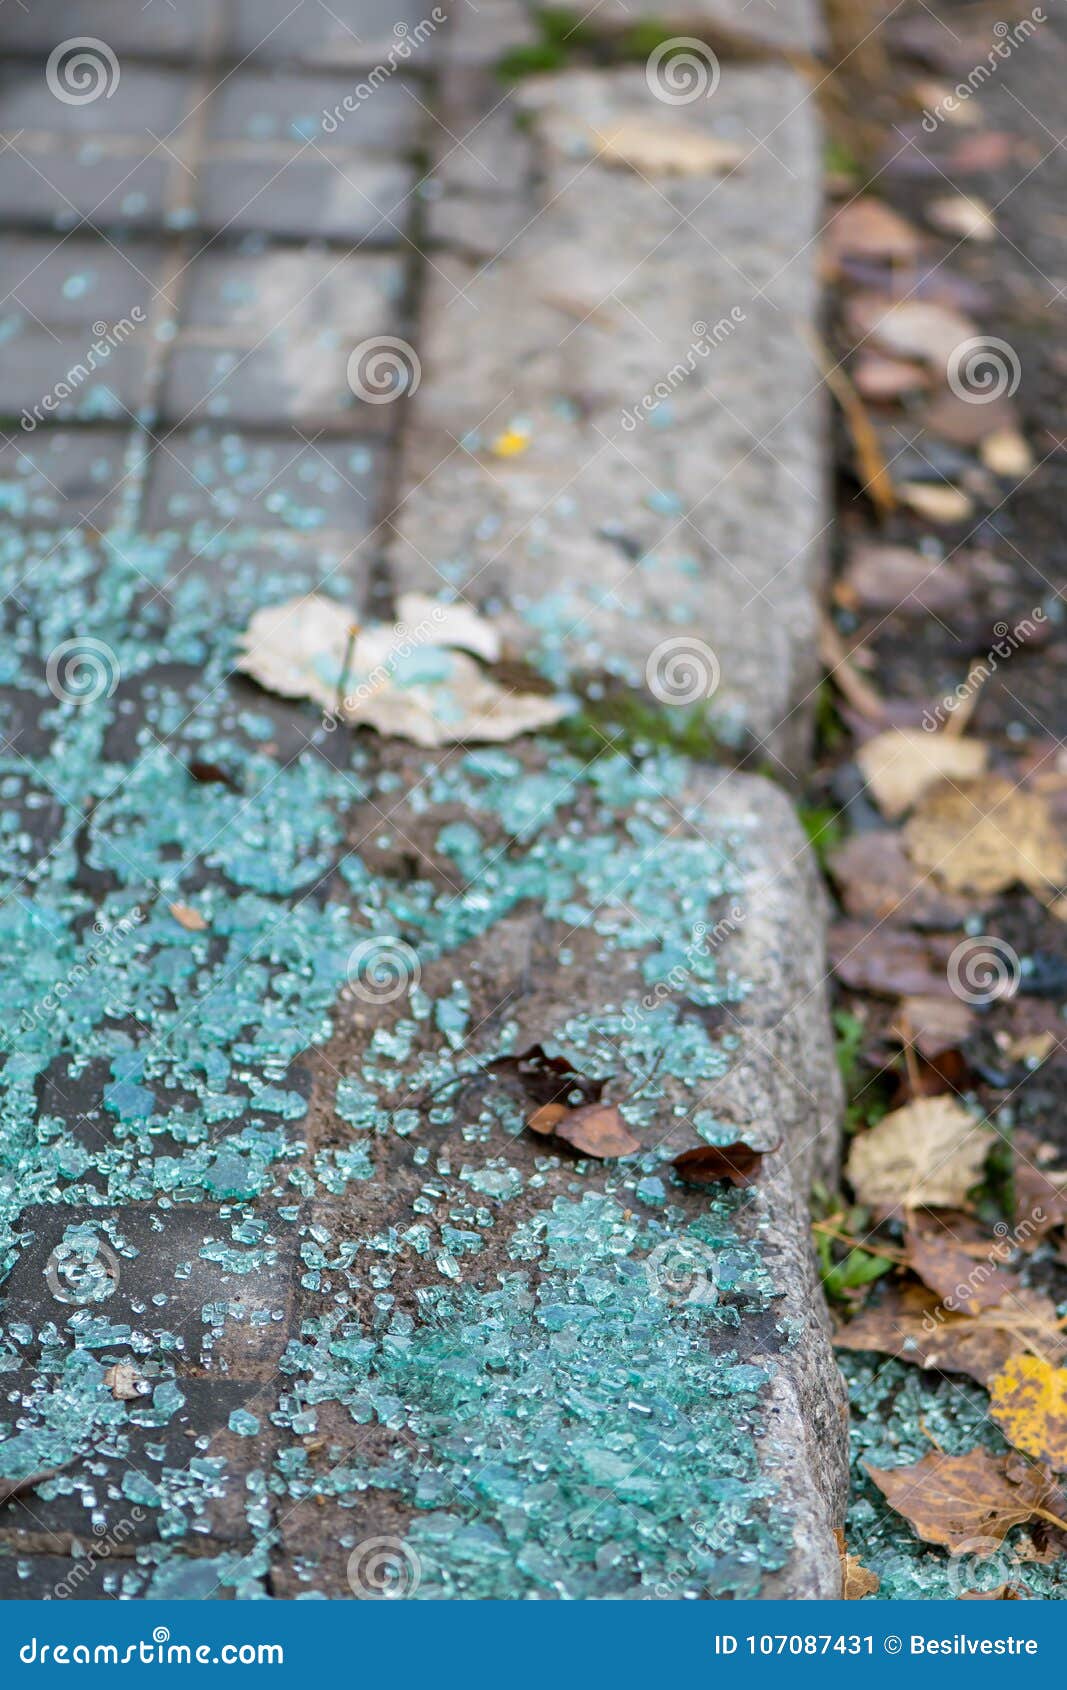 Broken Glass On The Sidewalk Stock Image Image Of Space Messy 107087431